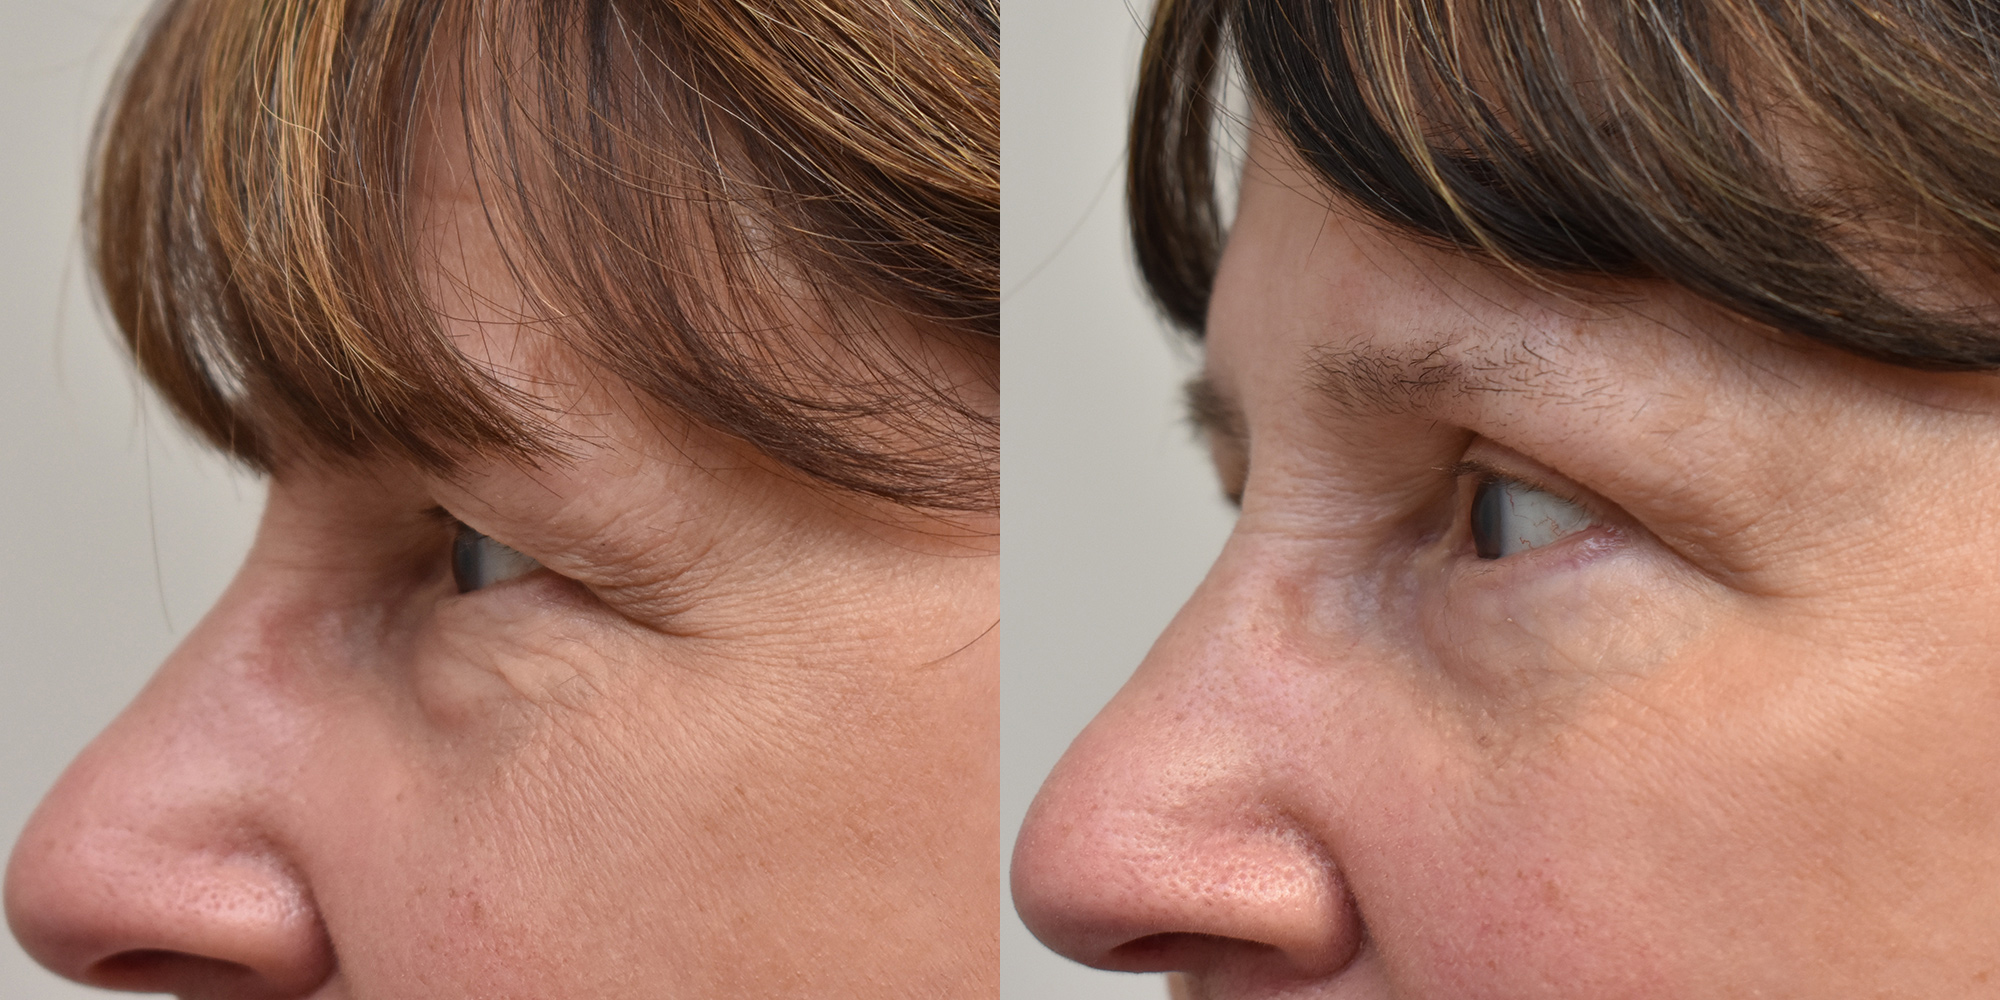 Eyelid Surgery Before and After photo by Susan Gannon, MD of The Plastic Surgery Group in Albany, NY